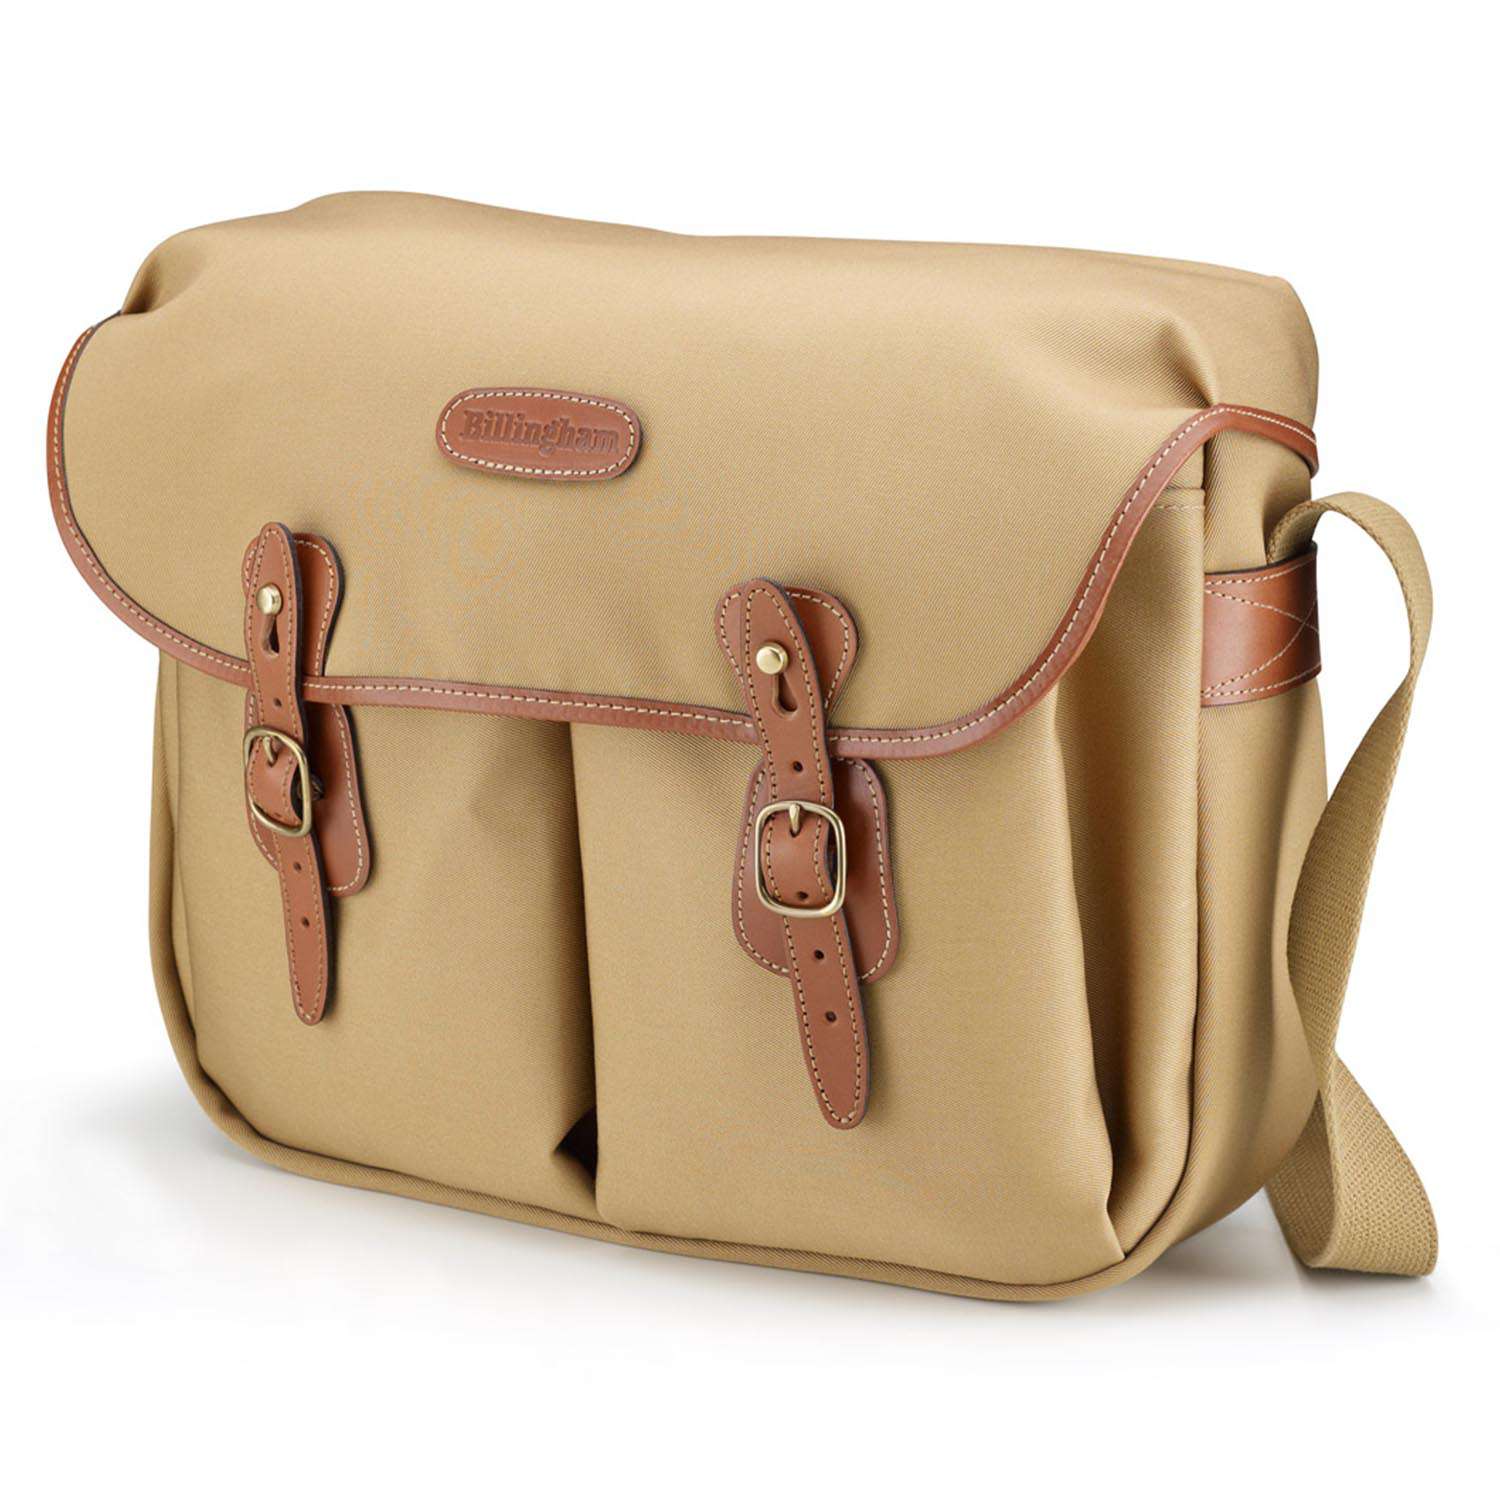 Every Photographer Should Aspire to Own at Least One Billingham Bag  BH  eXplora